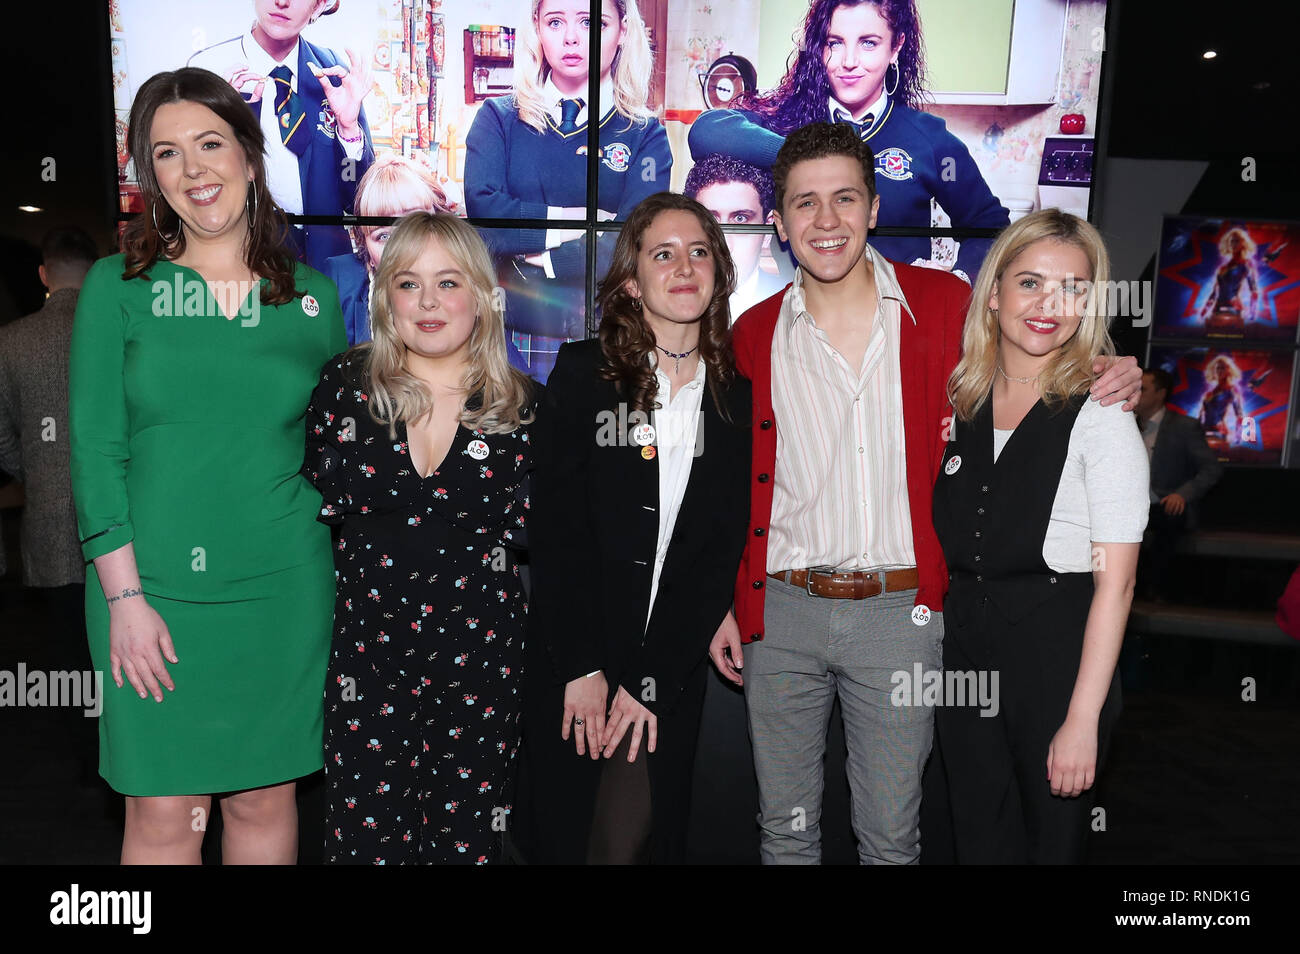 (left to right) Writer Lisa McGee with cast members Nicola Coughlan , Louisa Harland, Dylan Llewellyn and Saoirse-Monica Jackson at the Omniplex Cinema in Londonderry for the Derry Girls premiere ahead of the broadcast of the second series on Channel 4. Stock Photo